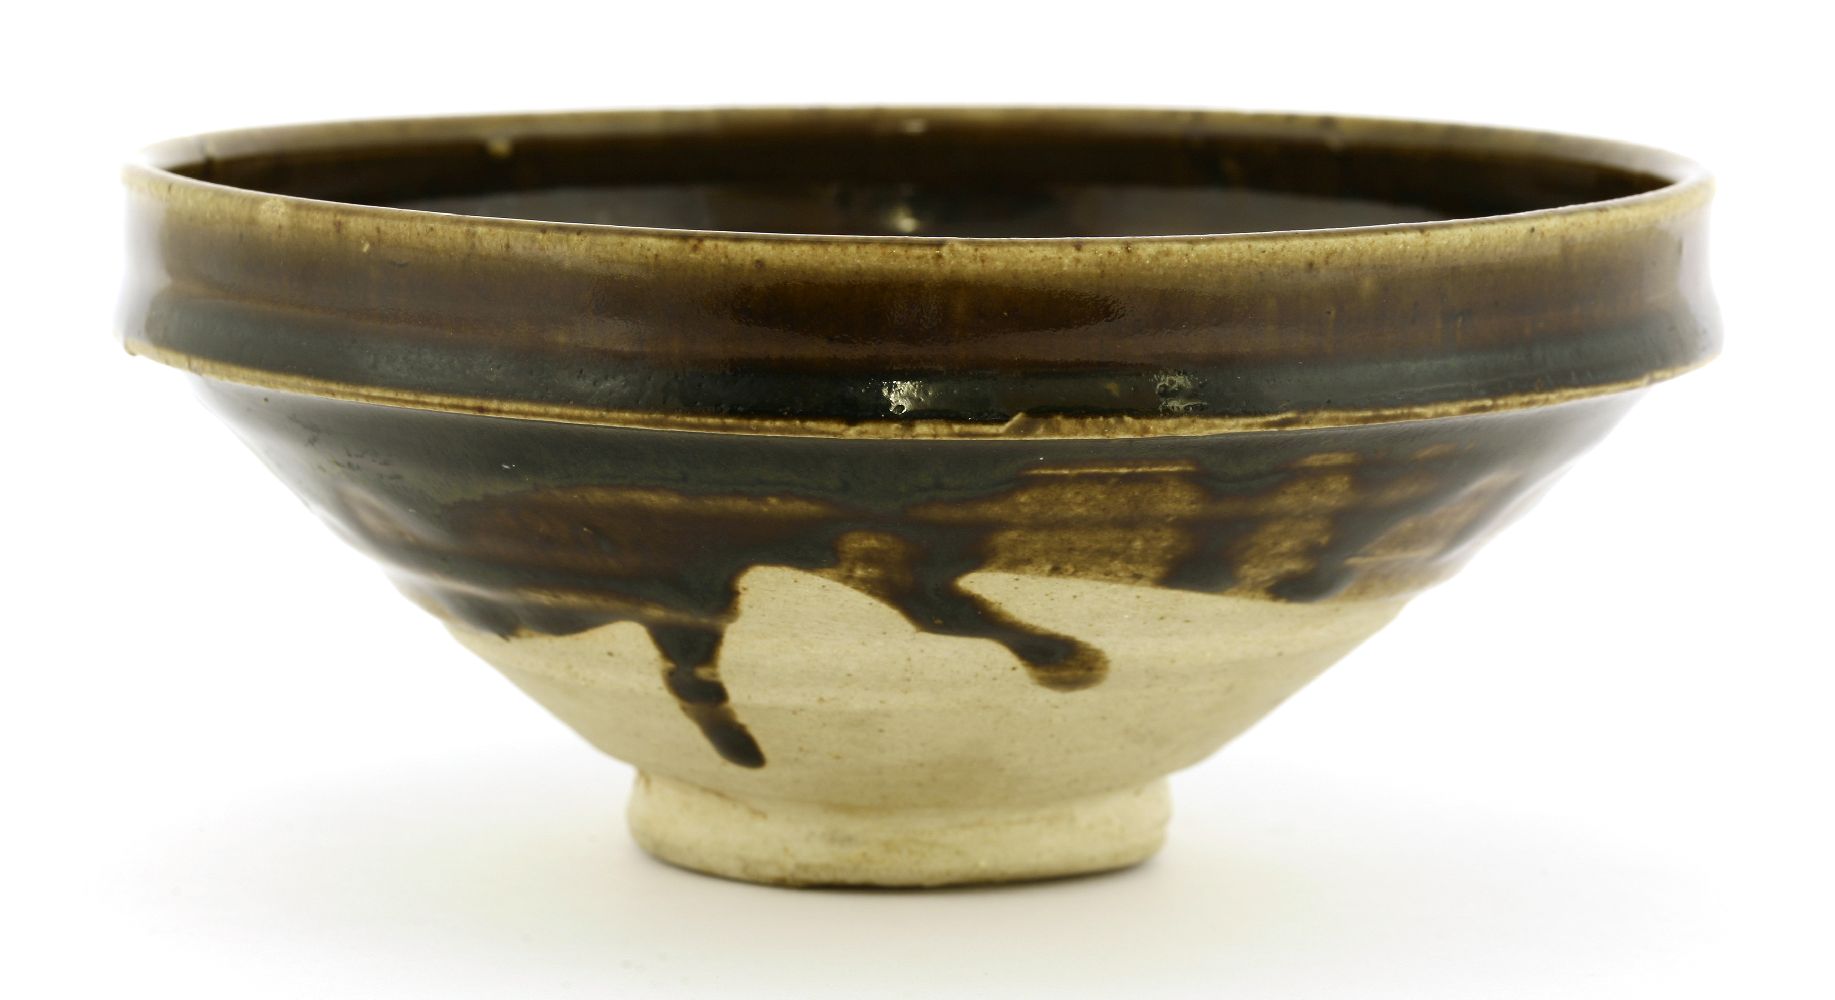 A Chinese Henan kiln black-glazed bowl,Song dynasty, 12th/13th century, of circular form on a